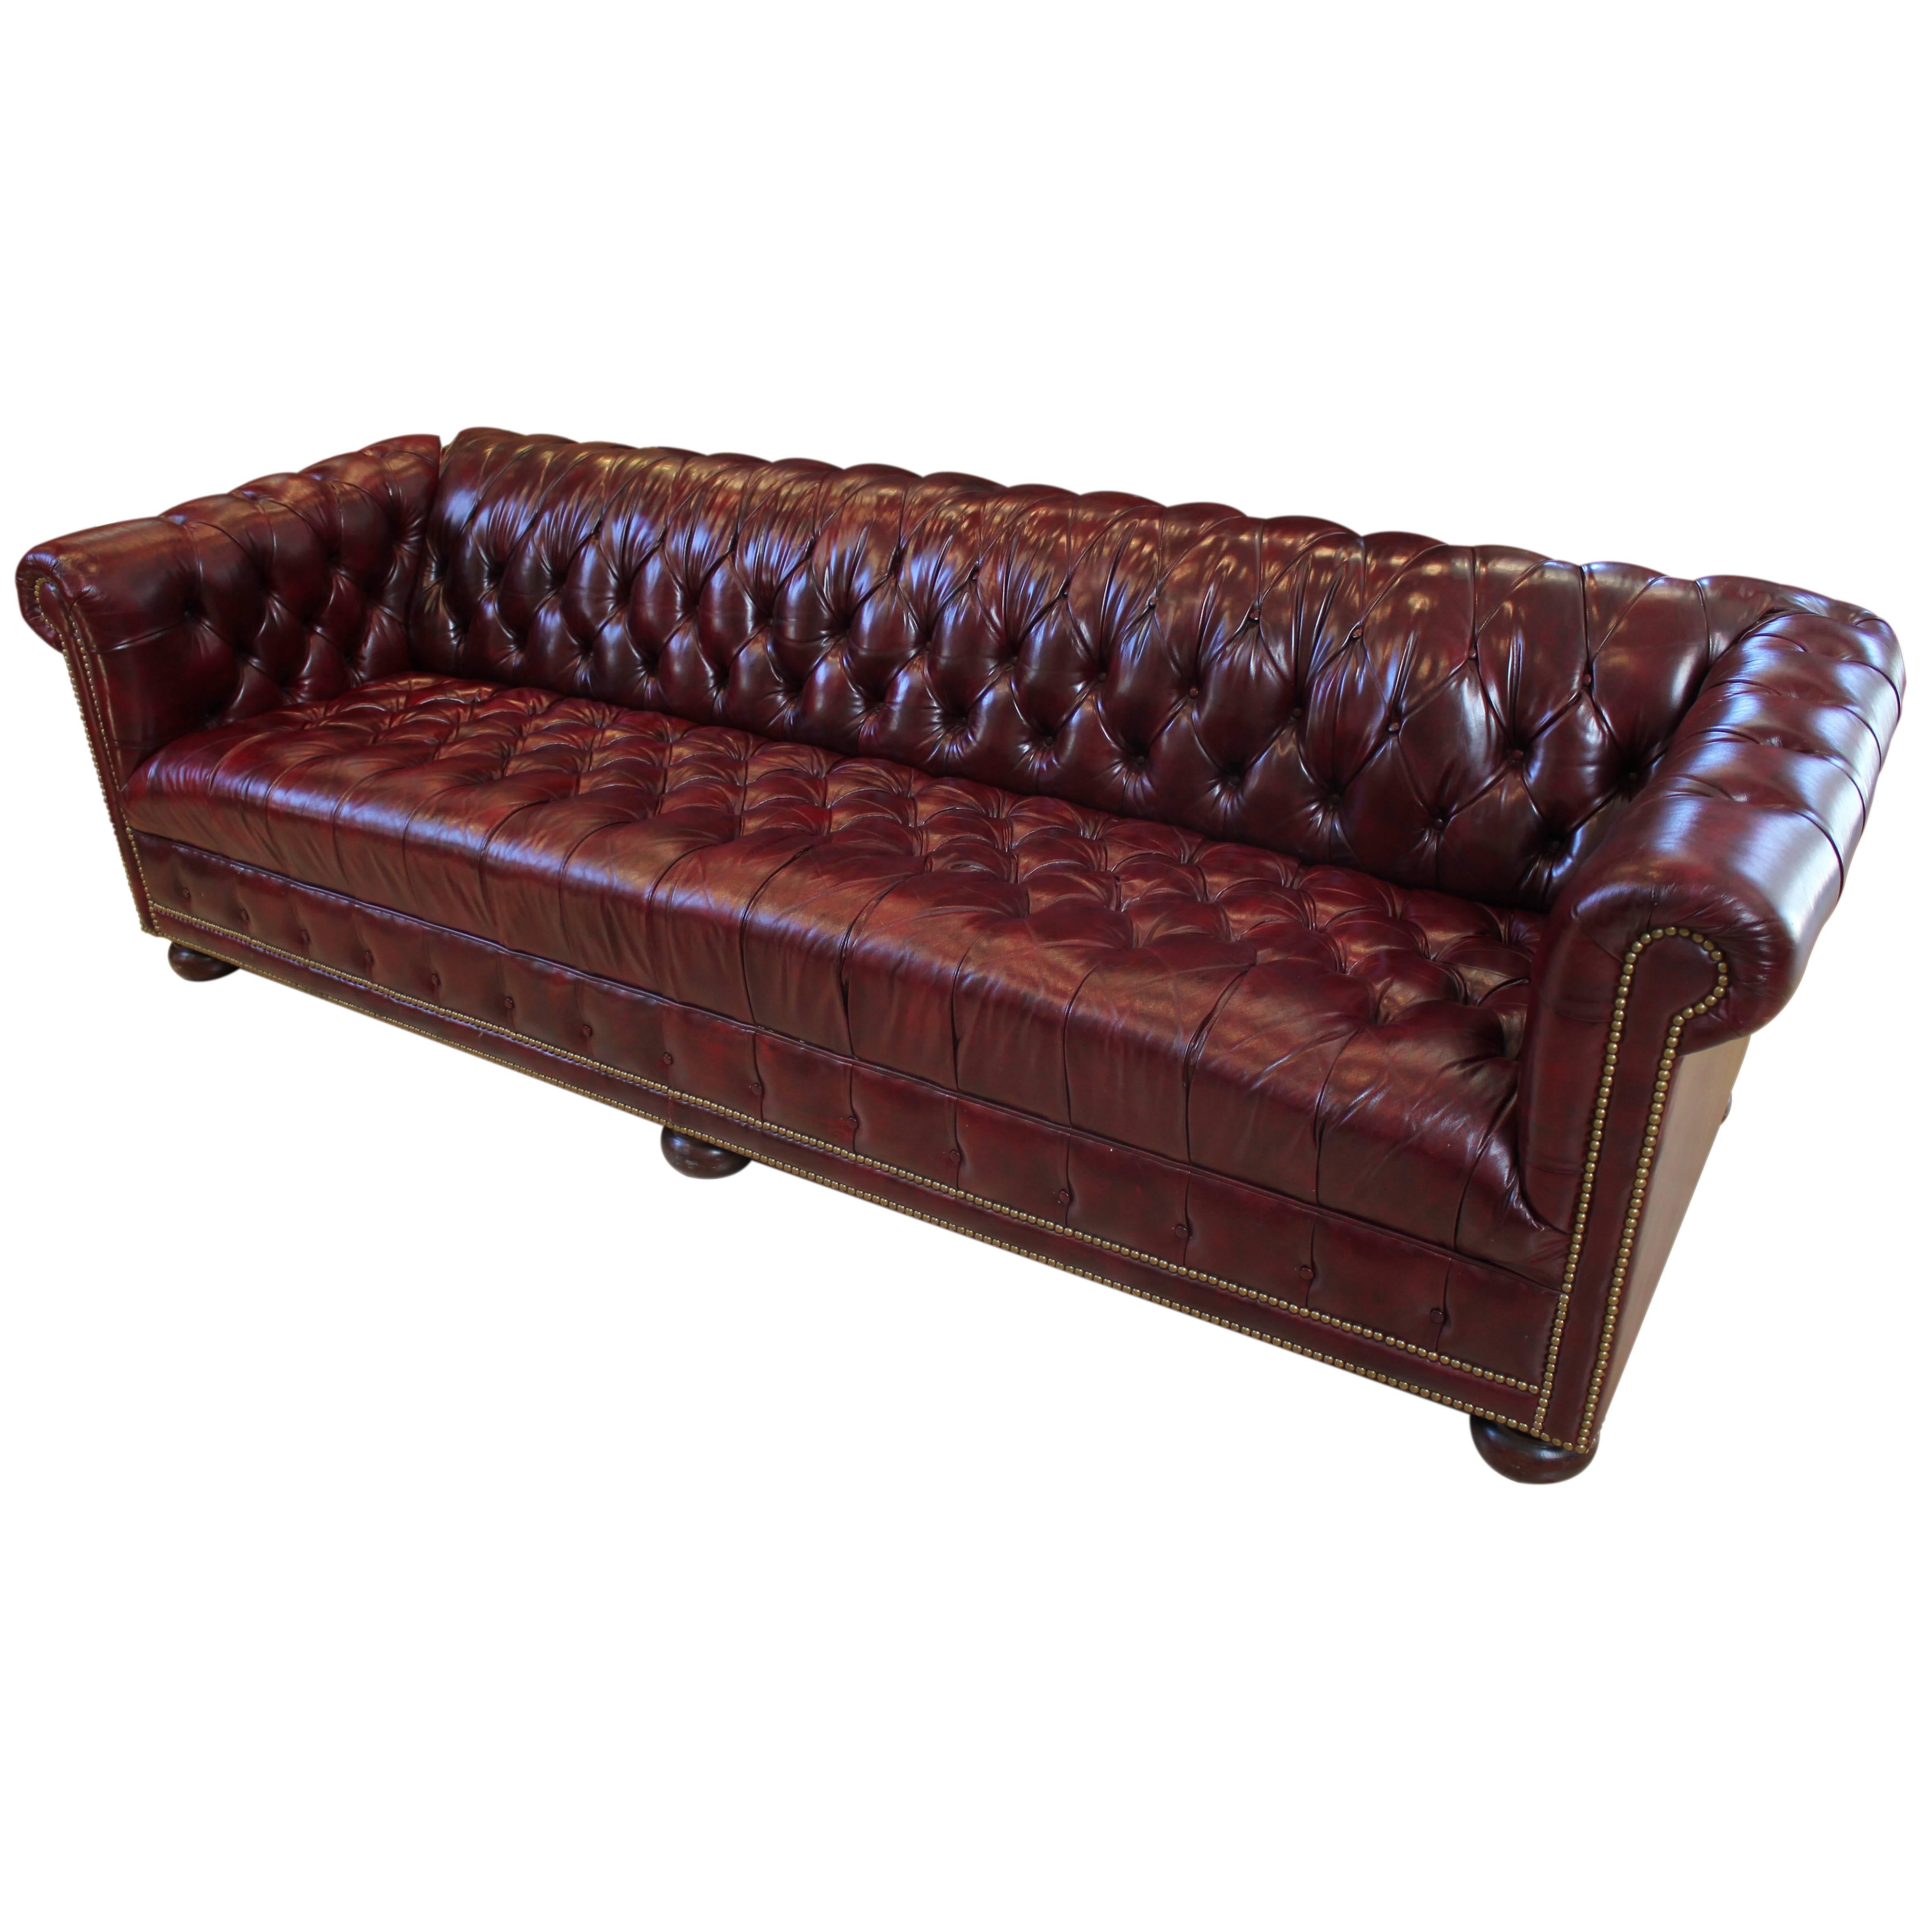 Vintage Tufted Leather 8' Chesterfield Sofa